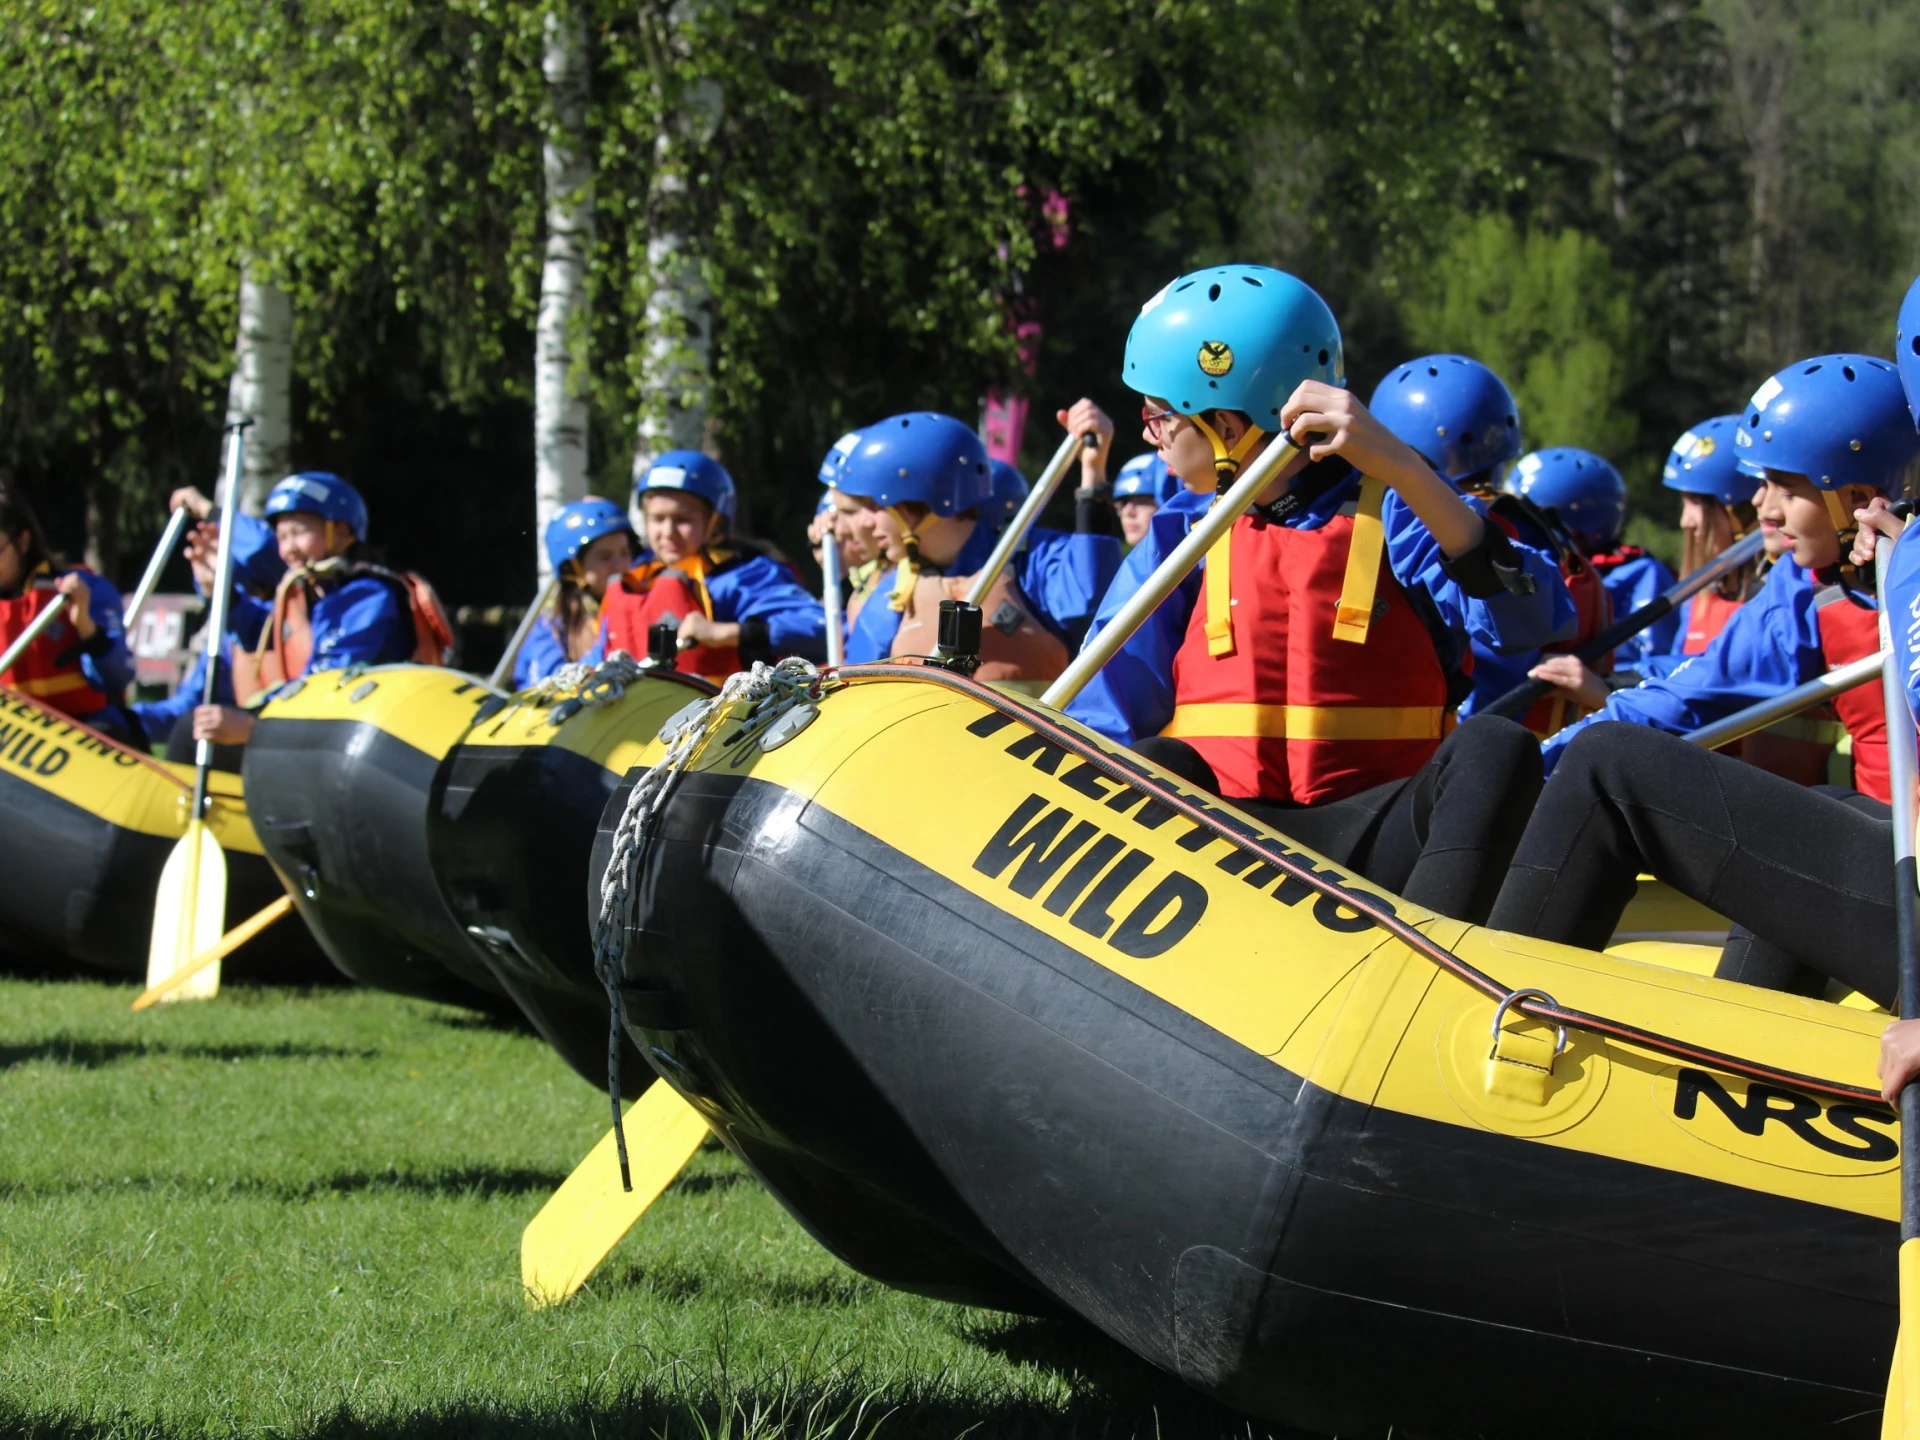 Rafting trip for groups